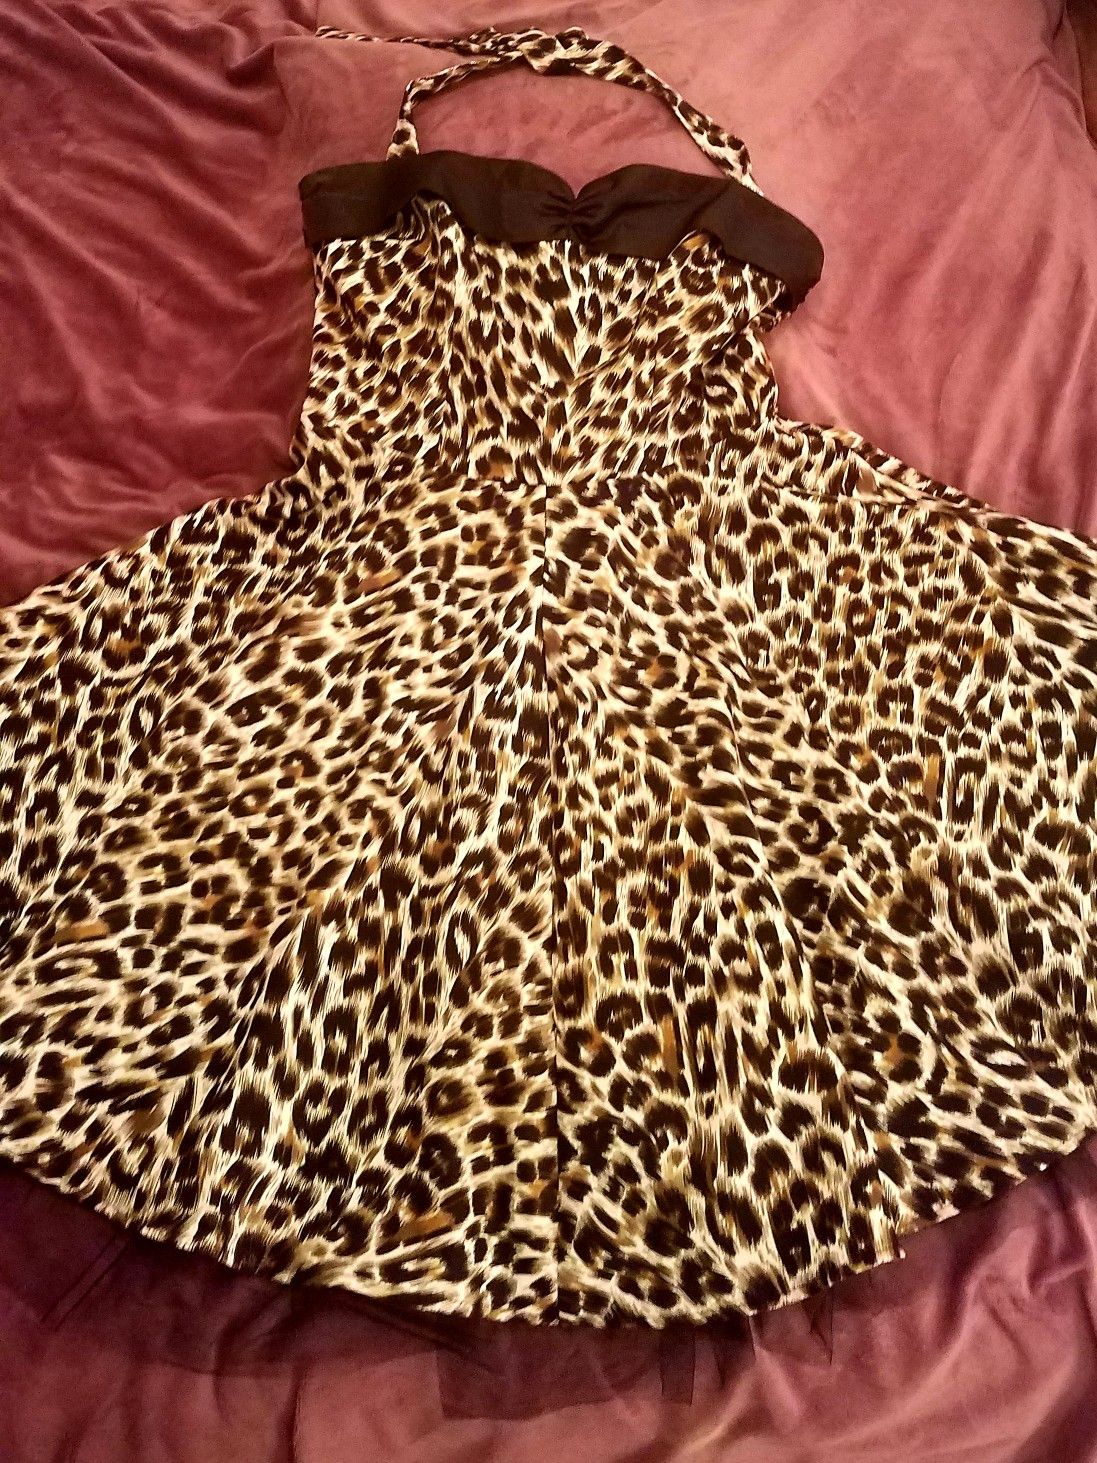 Lucky 13- Pin up style animal print w petticoat